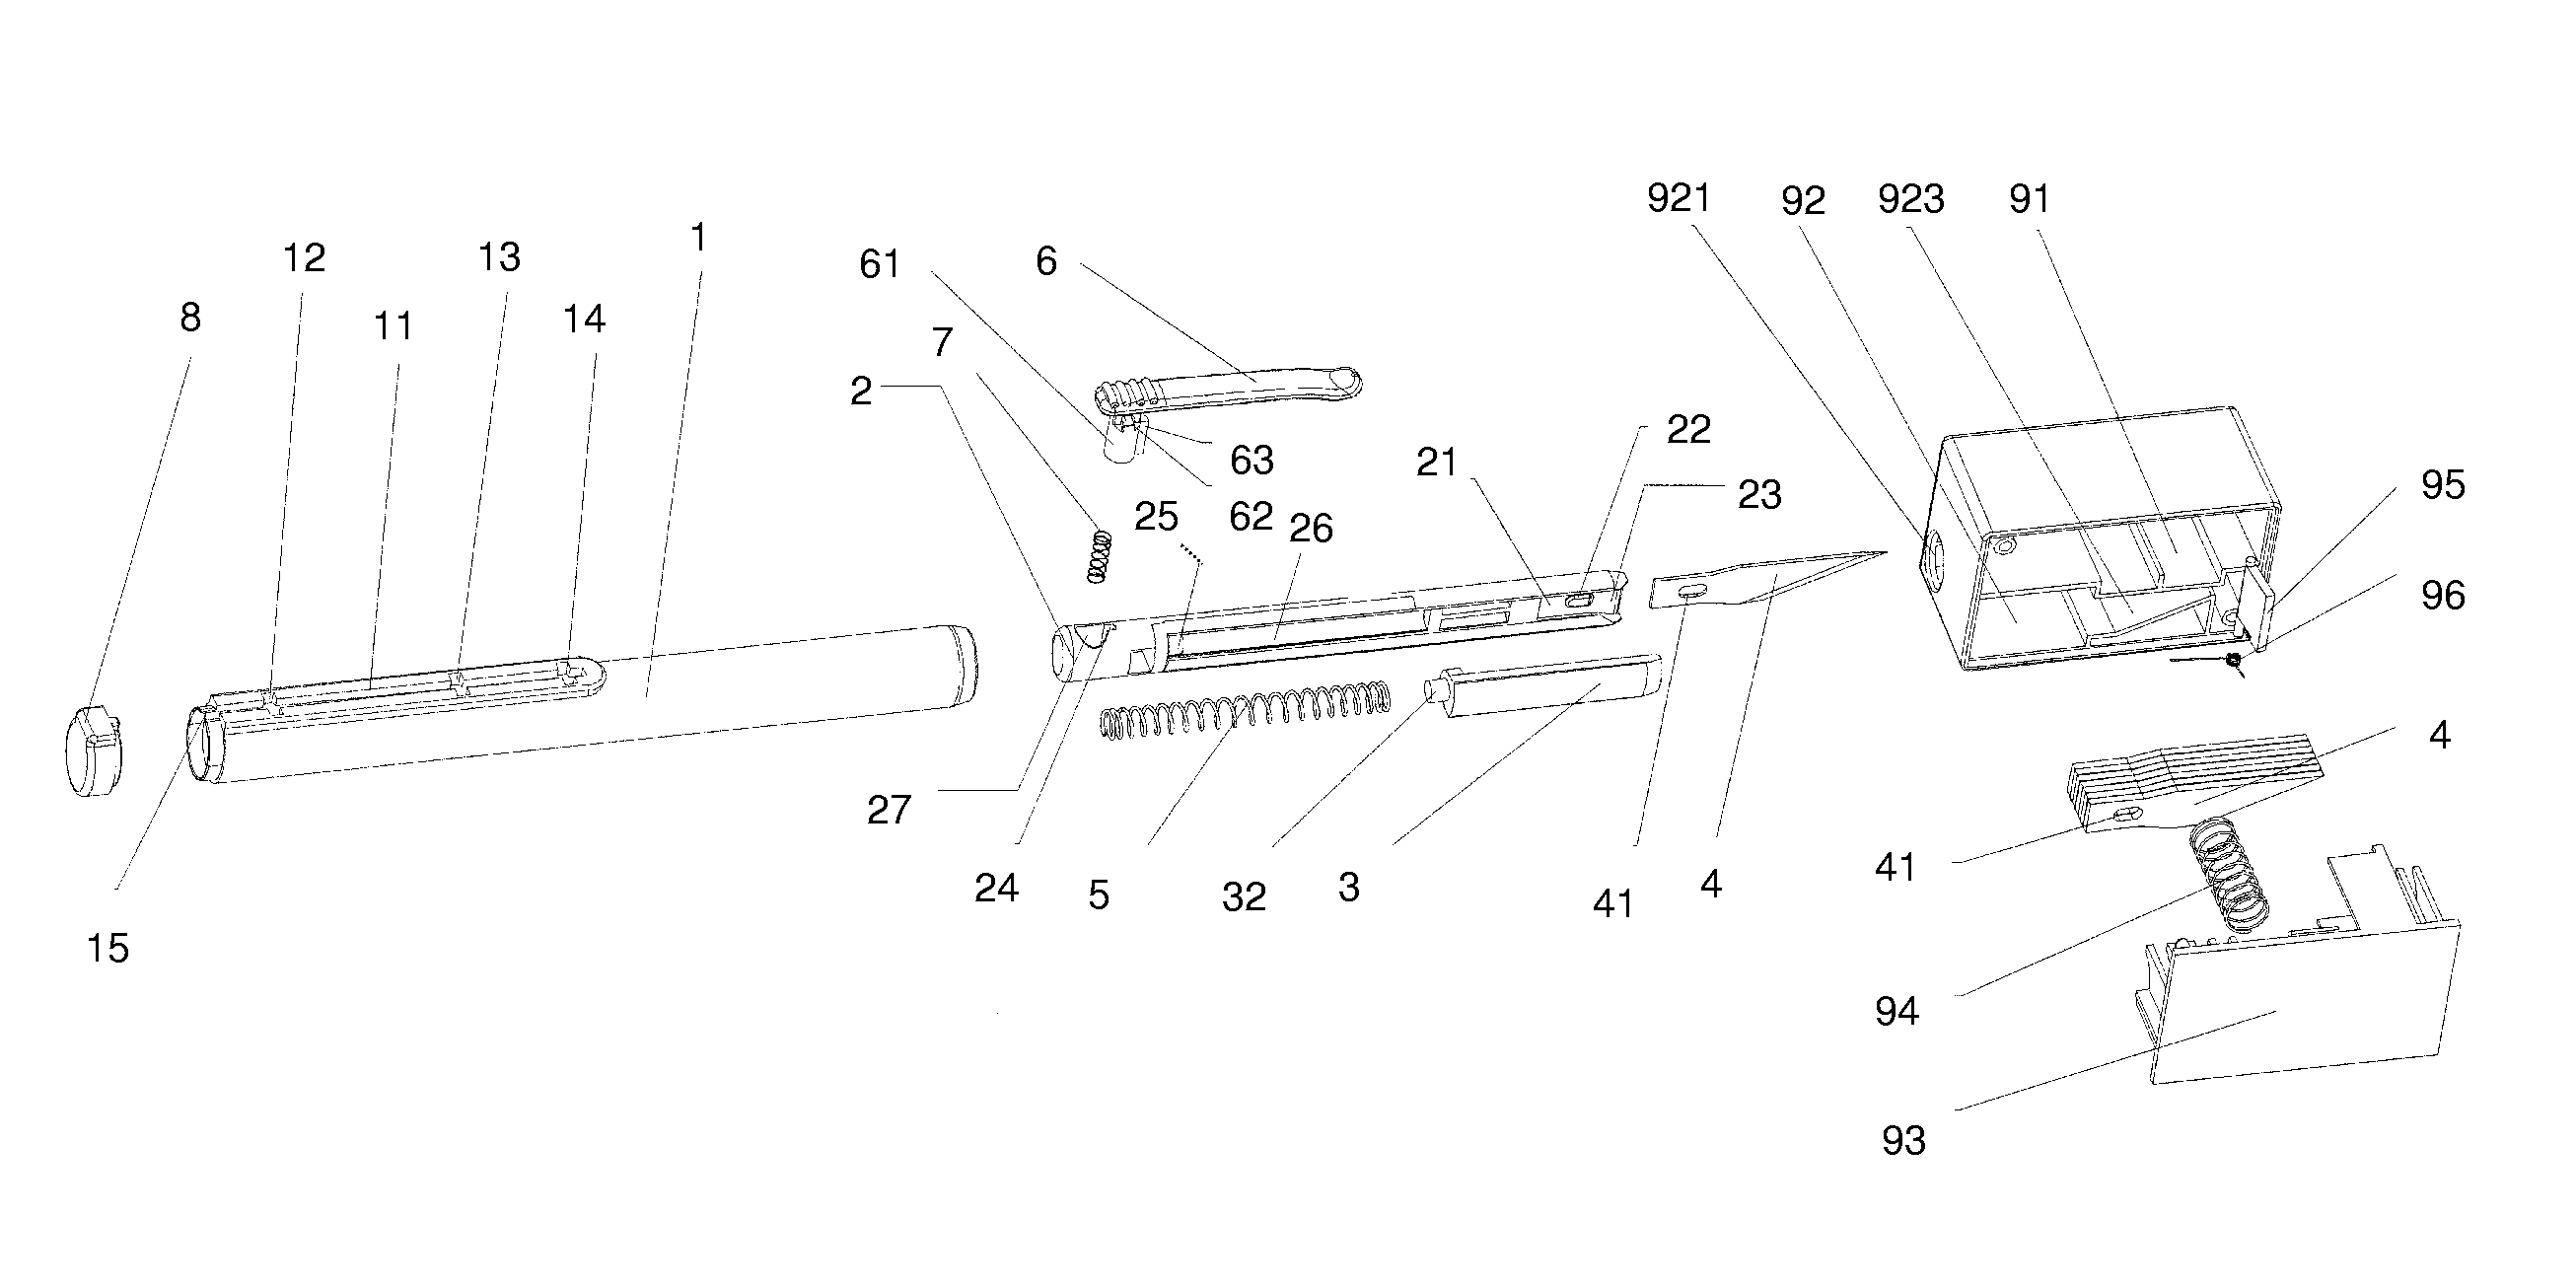 Hand-held cutter with automatic blade changer